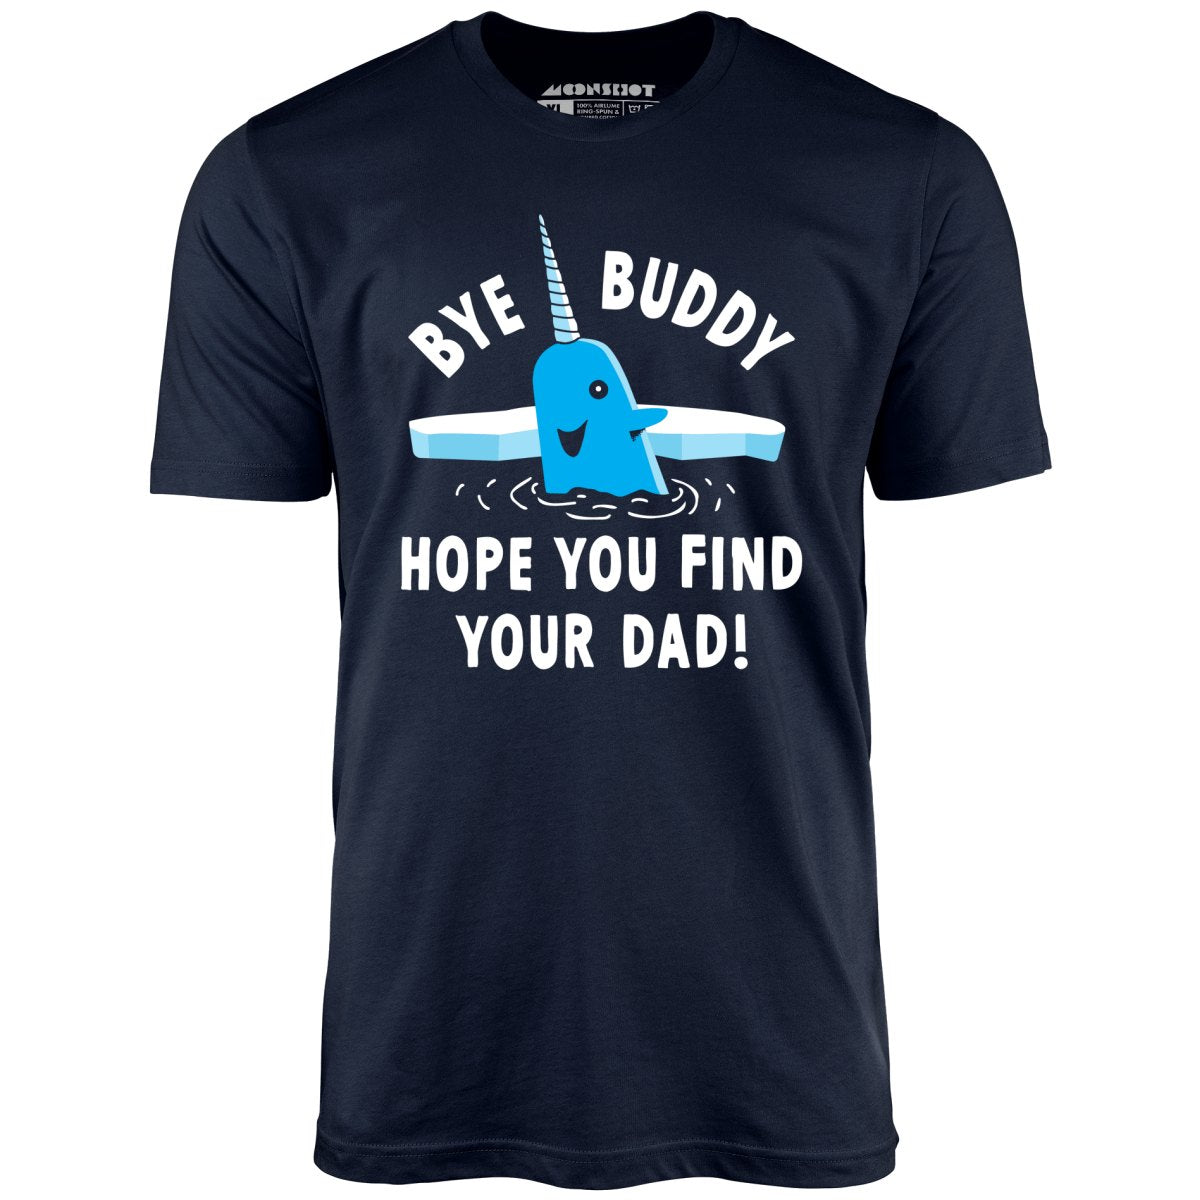 Bye Buddy Hope You Find Your Dad - Unisex T-Shirt